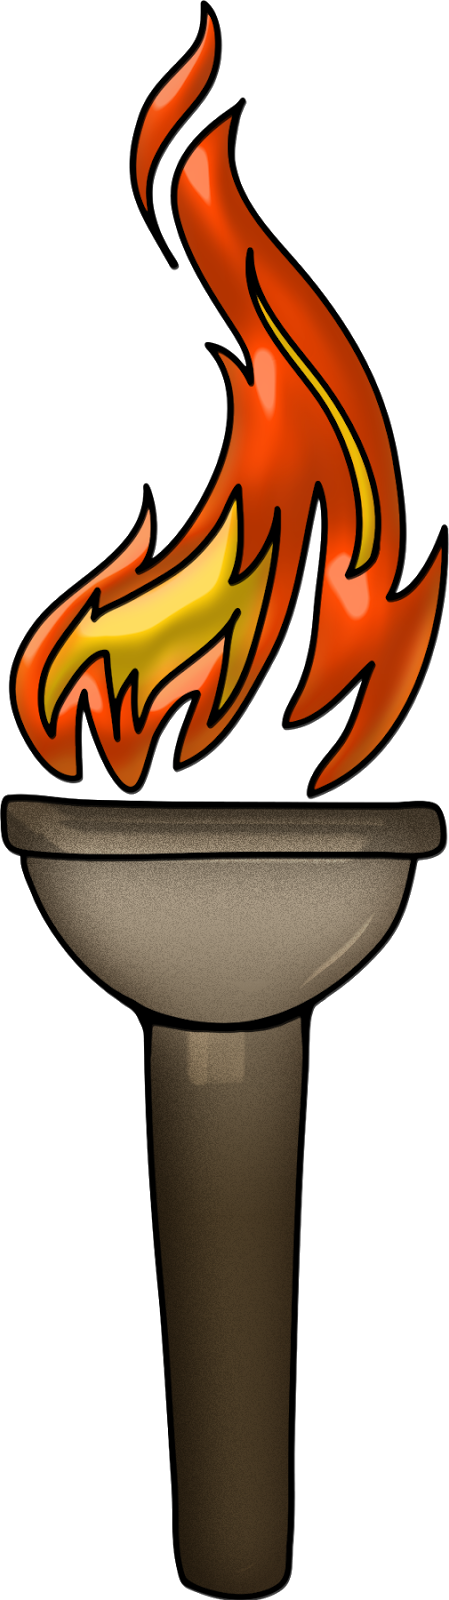 Free download clip art. Olympics clipart torch handle